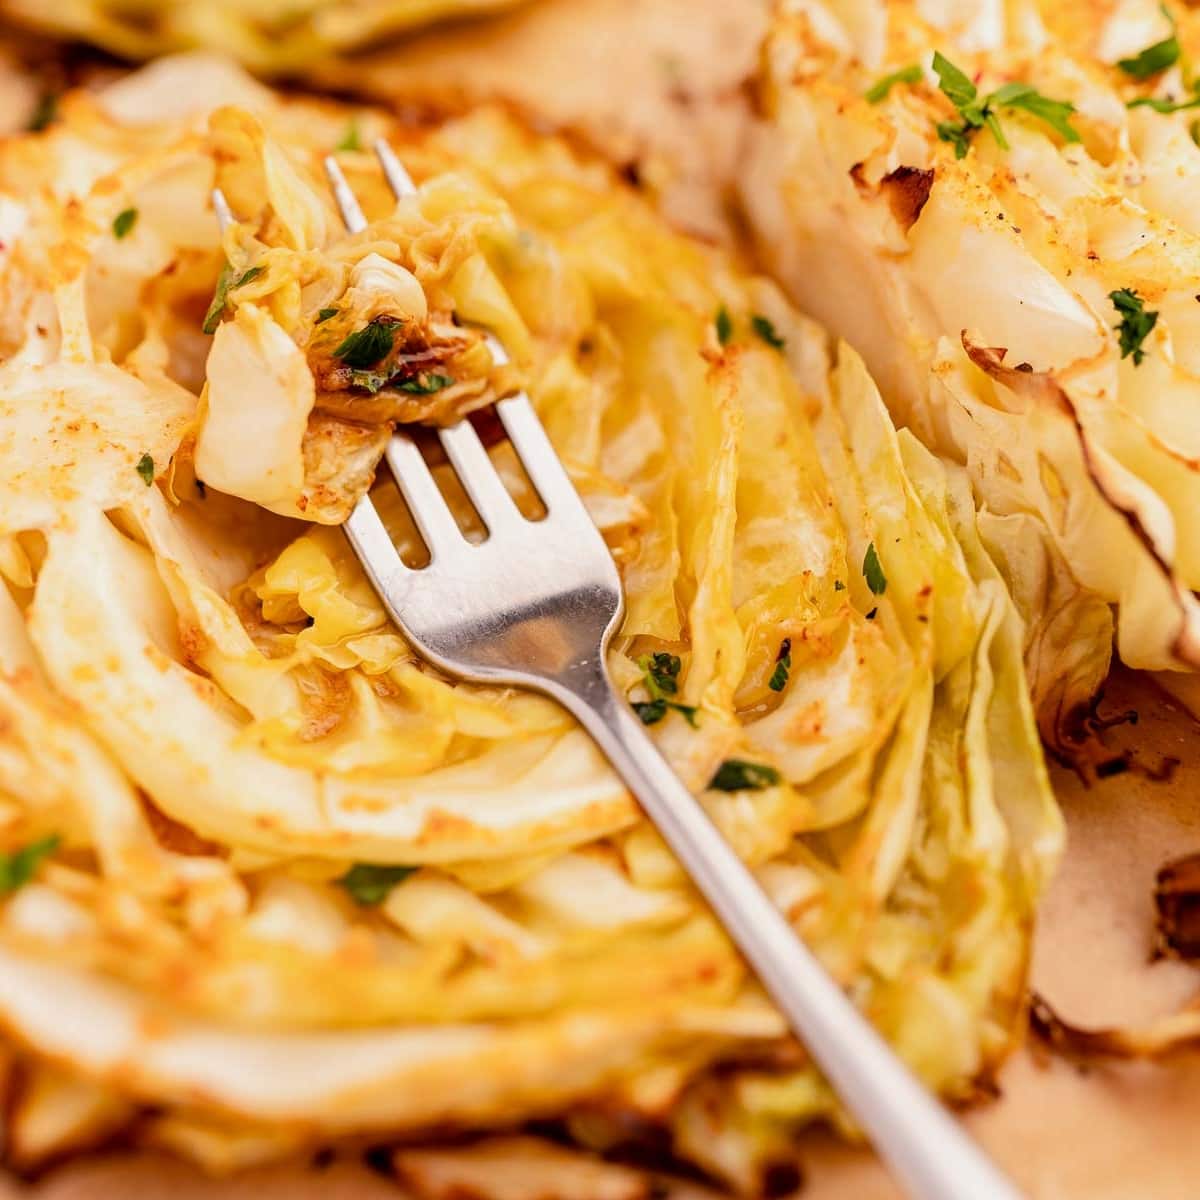 Roasted cabbage steaks with a fork digging into one of the cabbage steaks, garnished with herbs.